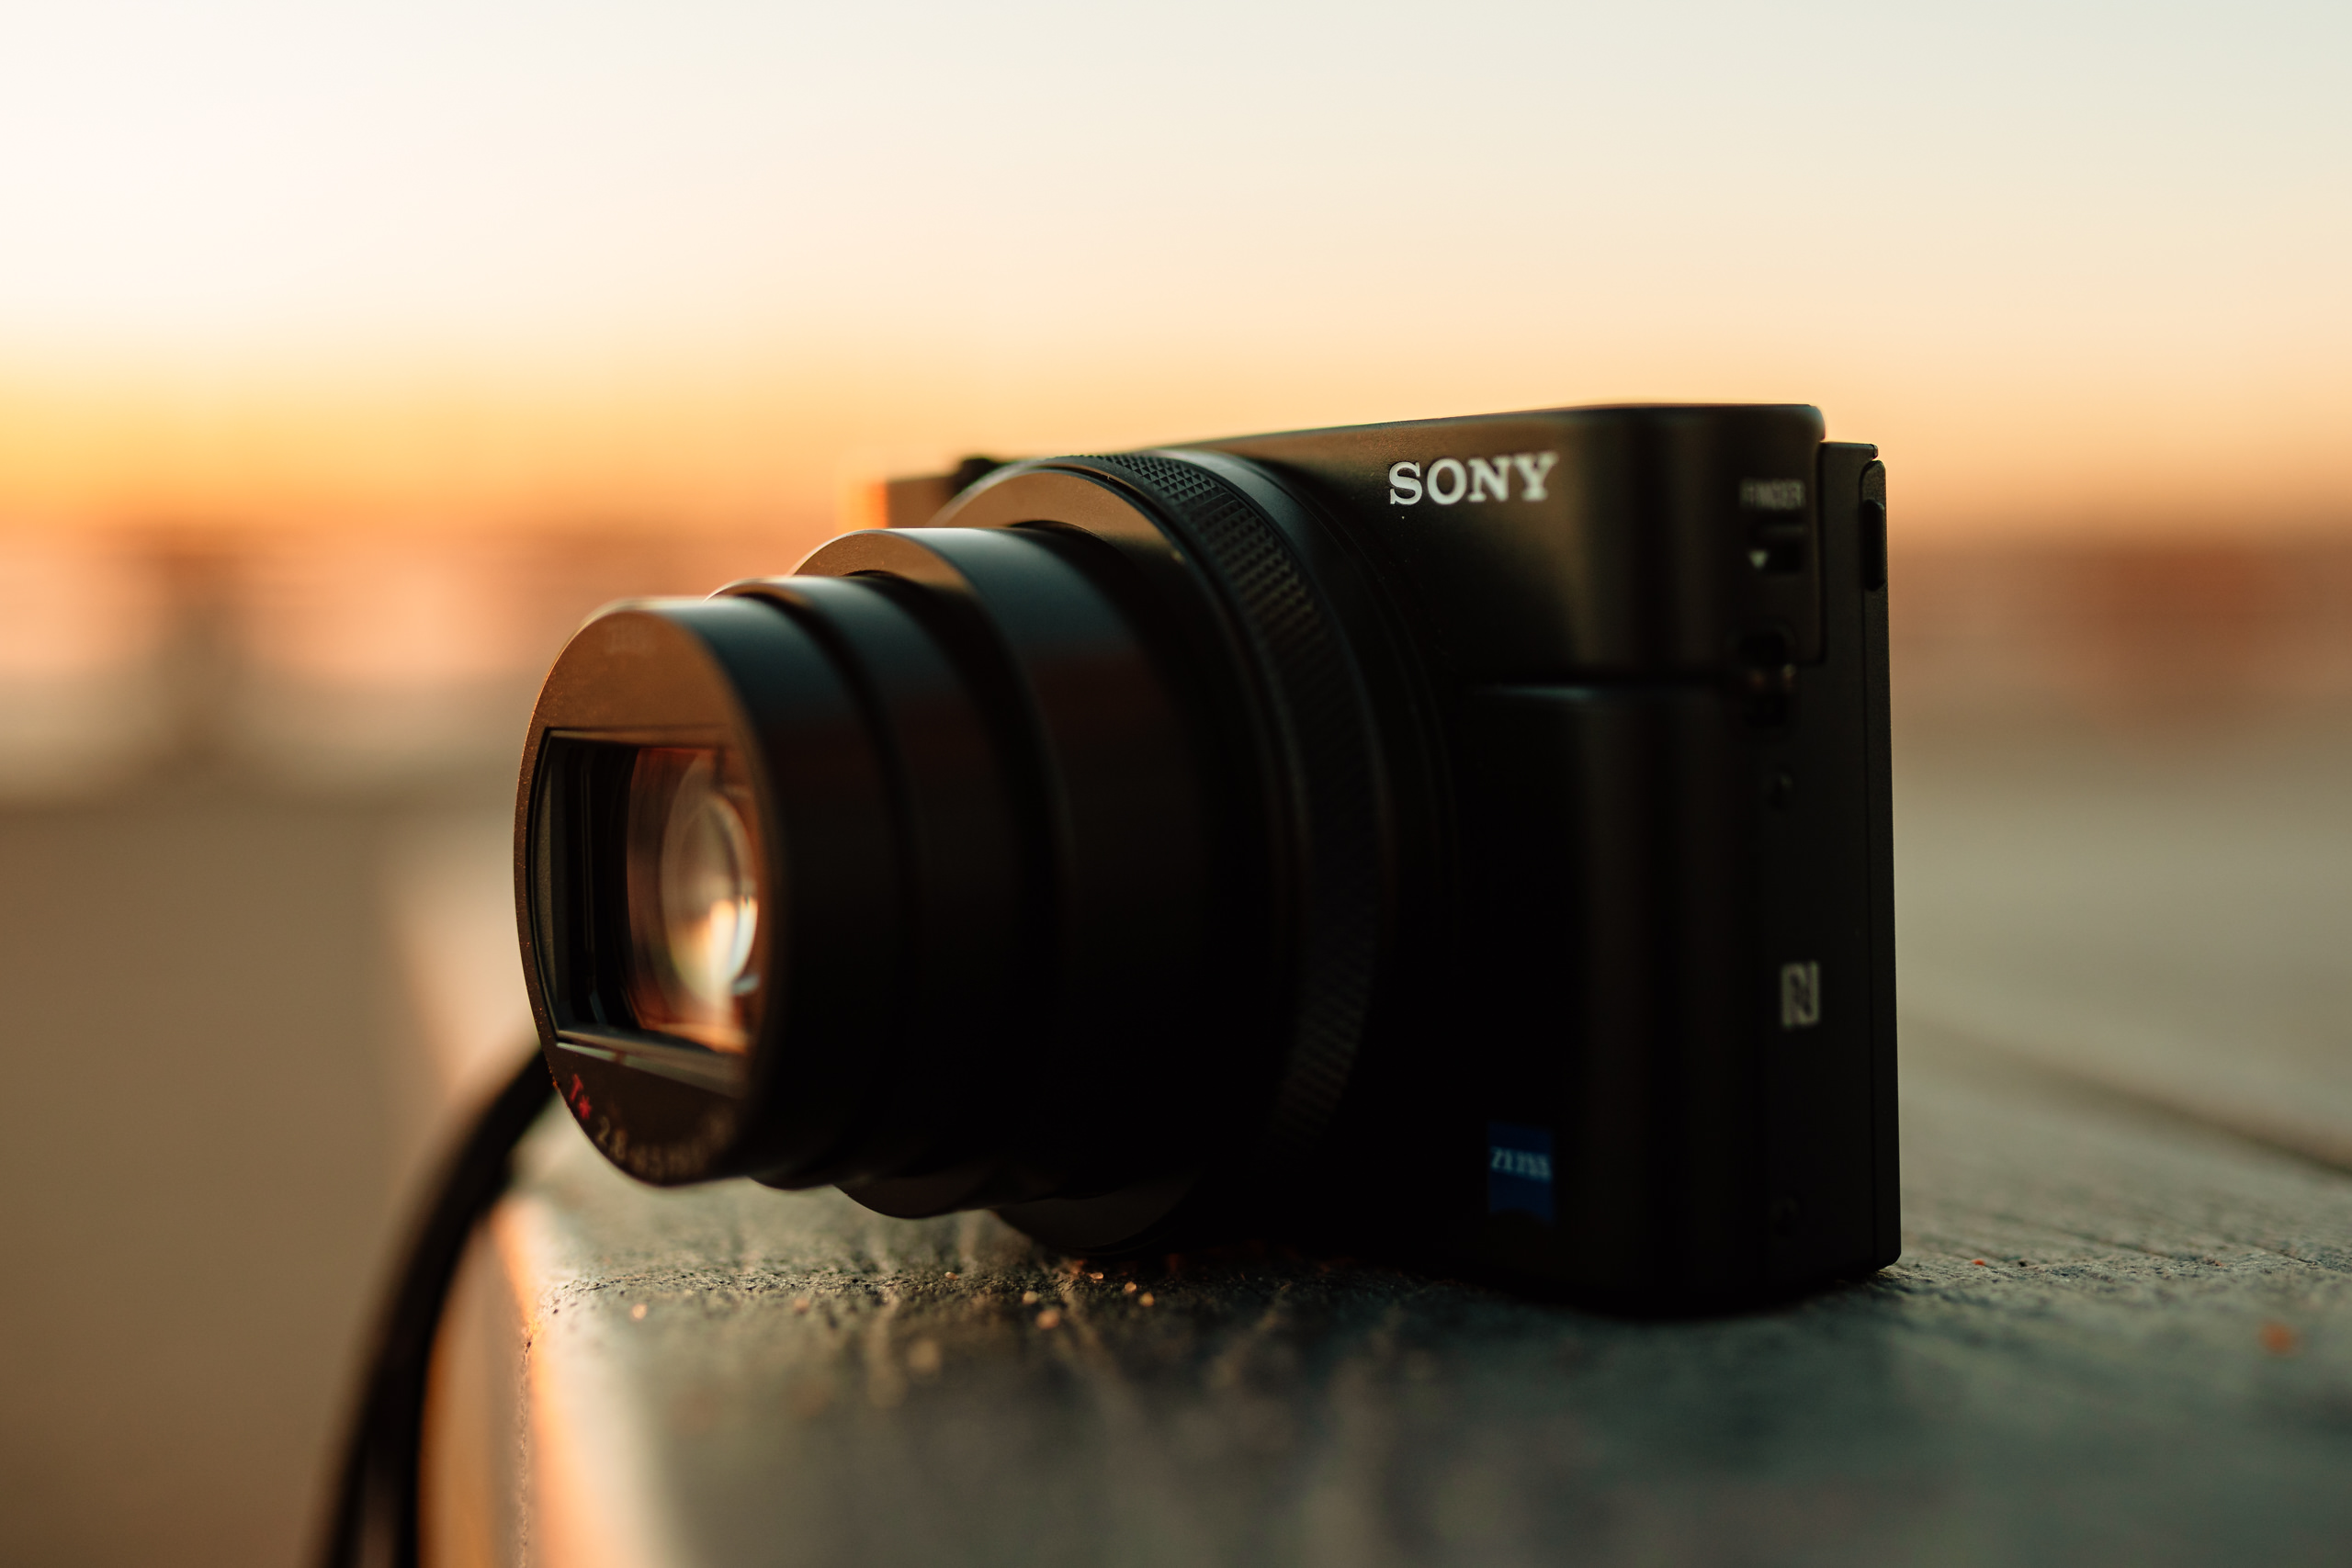 Sony RX100 VII High ISO Sample Images Test & Review